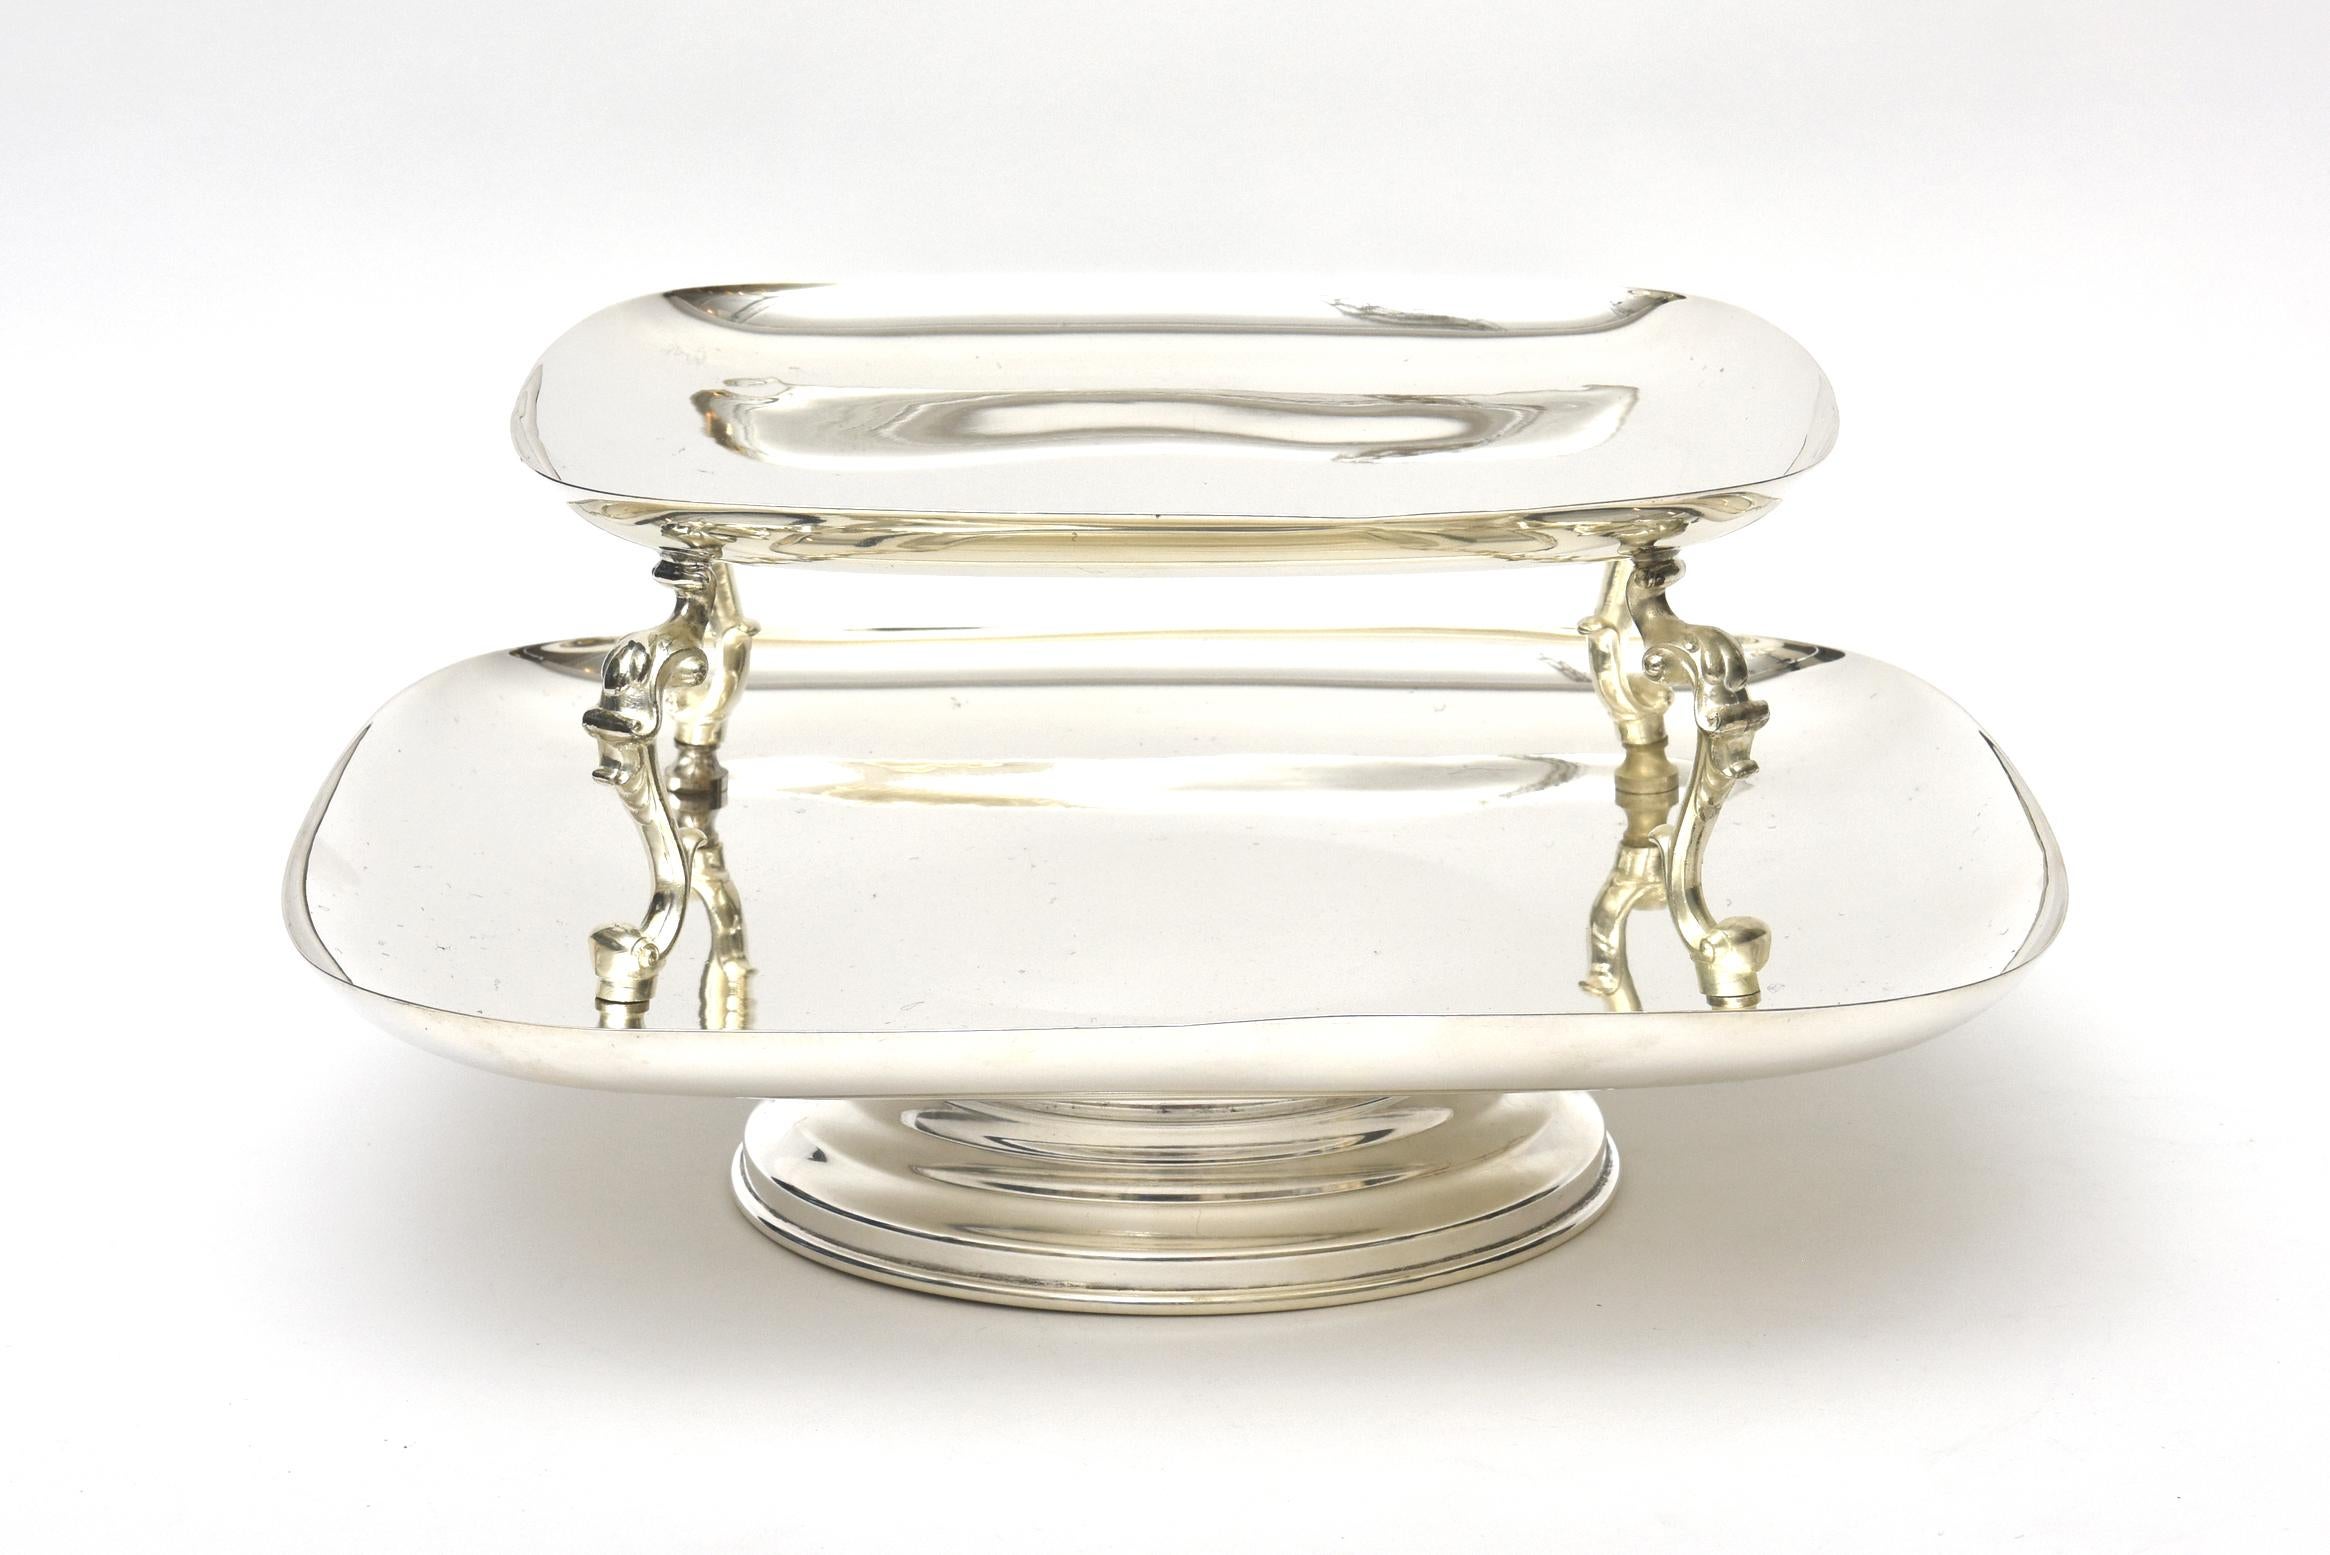 This large and modern looking 2-tiered serving caddy or serving piece swivels. The weight is good and solid. It is 7 inches to the top and between the two trays it is 4